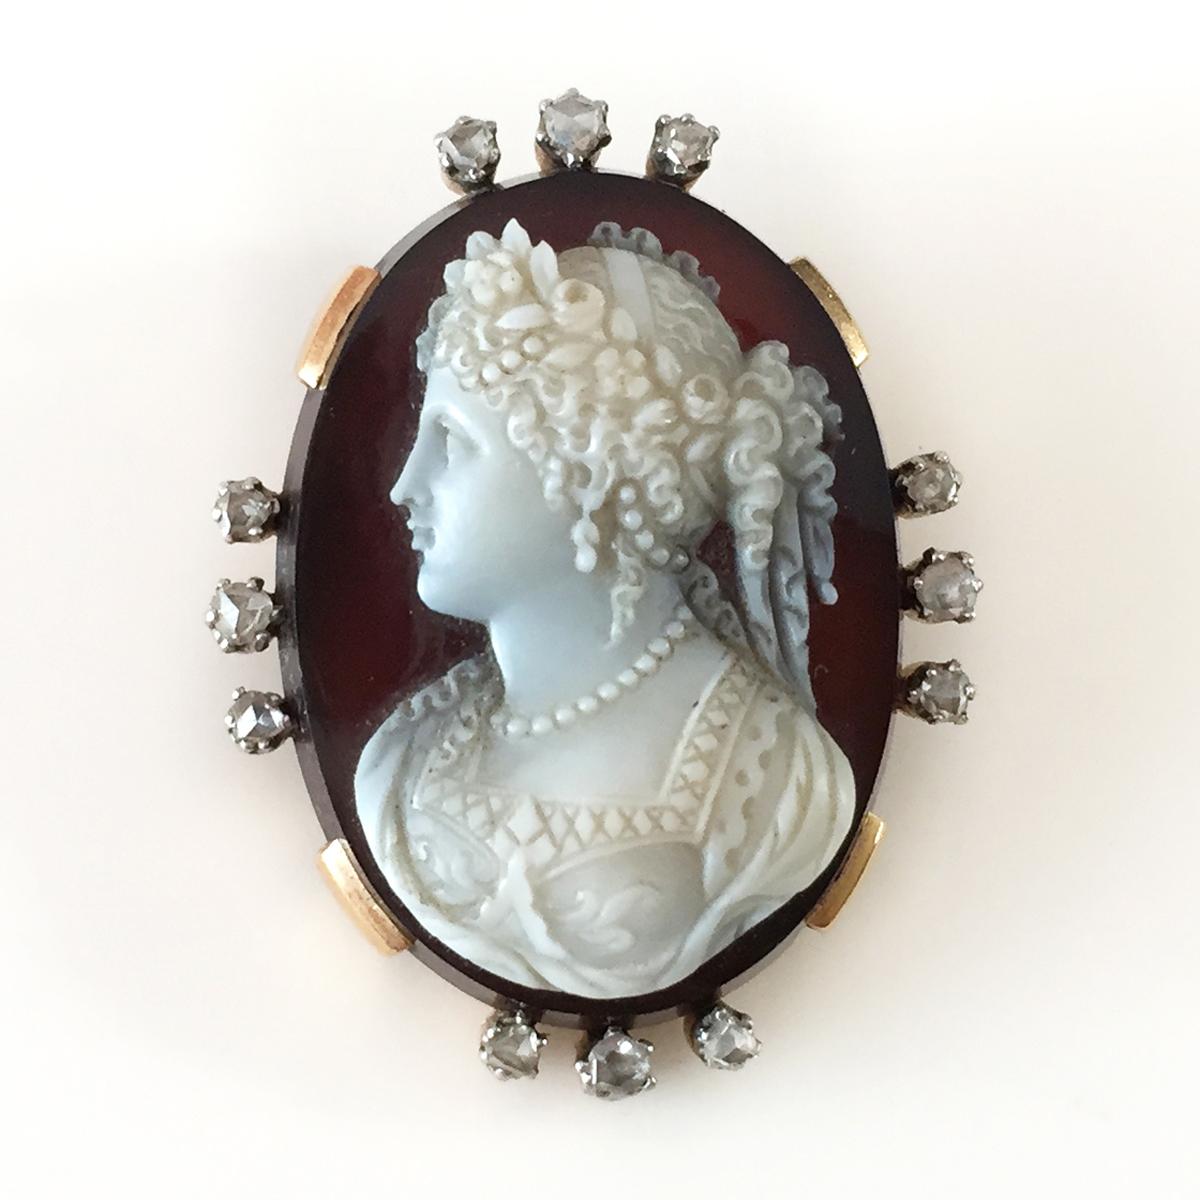 Antique hand carved Cameo on oval sardonyx plate brooch / pendant with 18k yellow gold frame surrounded by 3 from four sides old rose cut antique diamonds. Made in France. Circa 1838. Weight 17.33 grams. The Cameo is carved in high relief with a